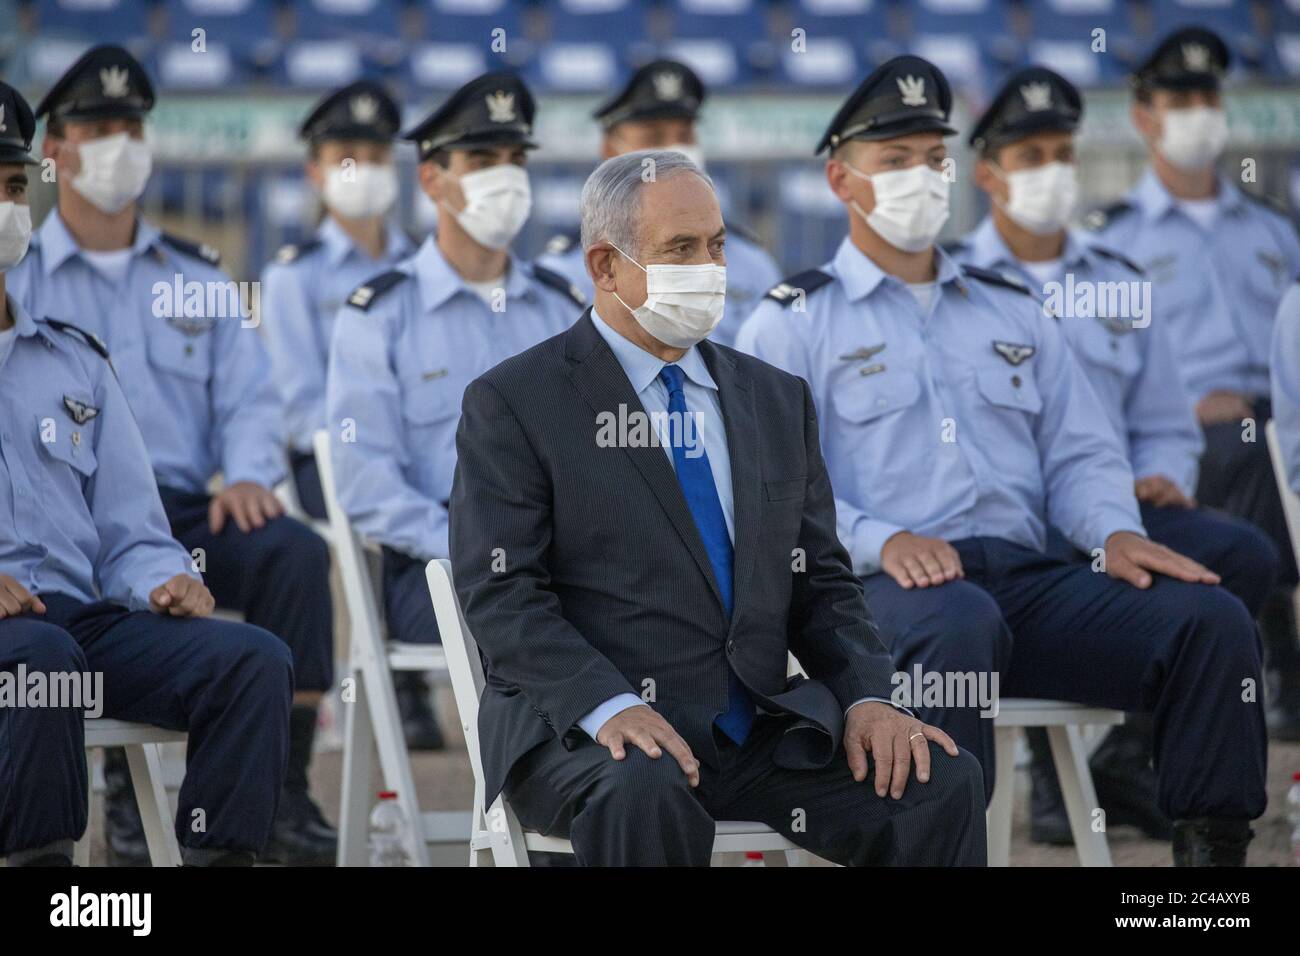 Hatzerim, Israel. 25th June, 2020. Israeli Prime Minister Benjamin Netanyahu, wearing a face mask to protect from COVID-19, attends a graduation ceremony for new pilots at Hatzerim air force base near the southern Israeli city of Beersheba, Israel, on Thursday, June 25, 2020. Photo by Ariel Schalit/UPI Credit: UPI/Alamy Live News Stock Photo